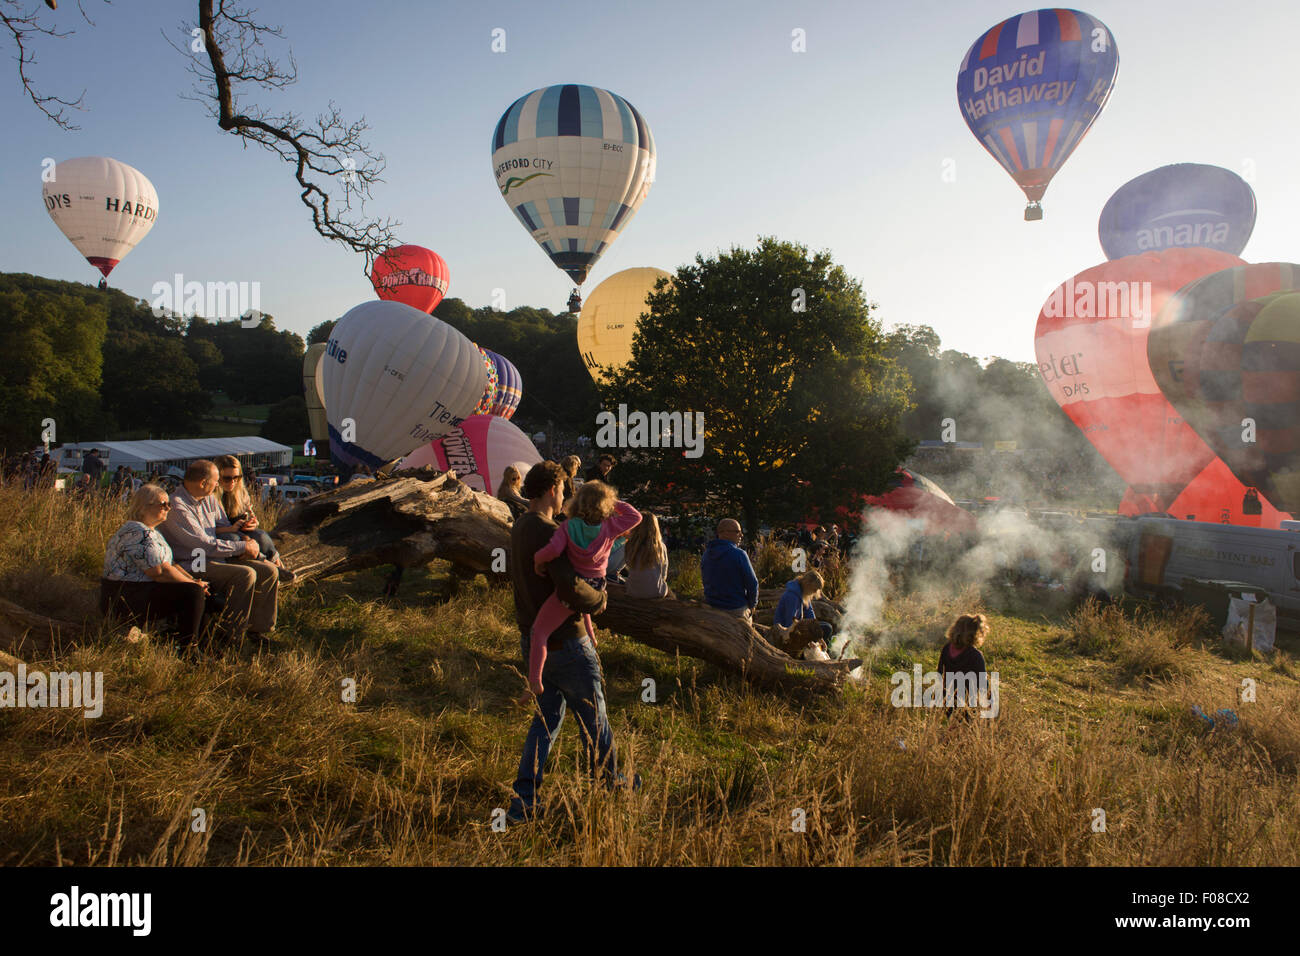 Families watch the mass lift-off by balloons at Bristols annual fiesta at Ashton Court, UK. Stock Photo